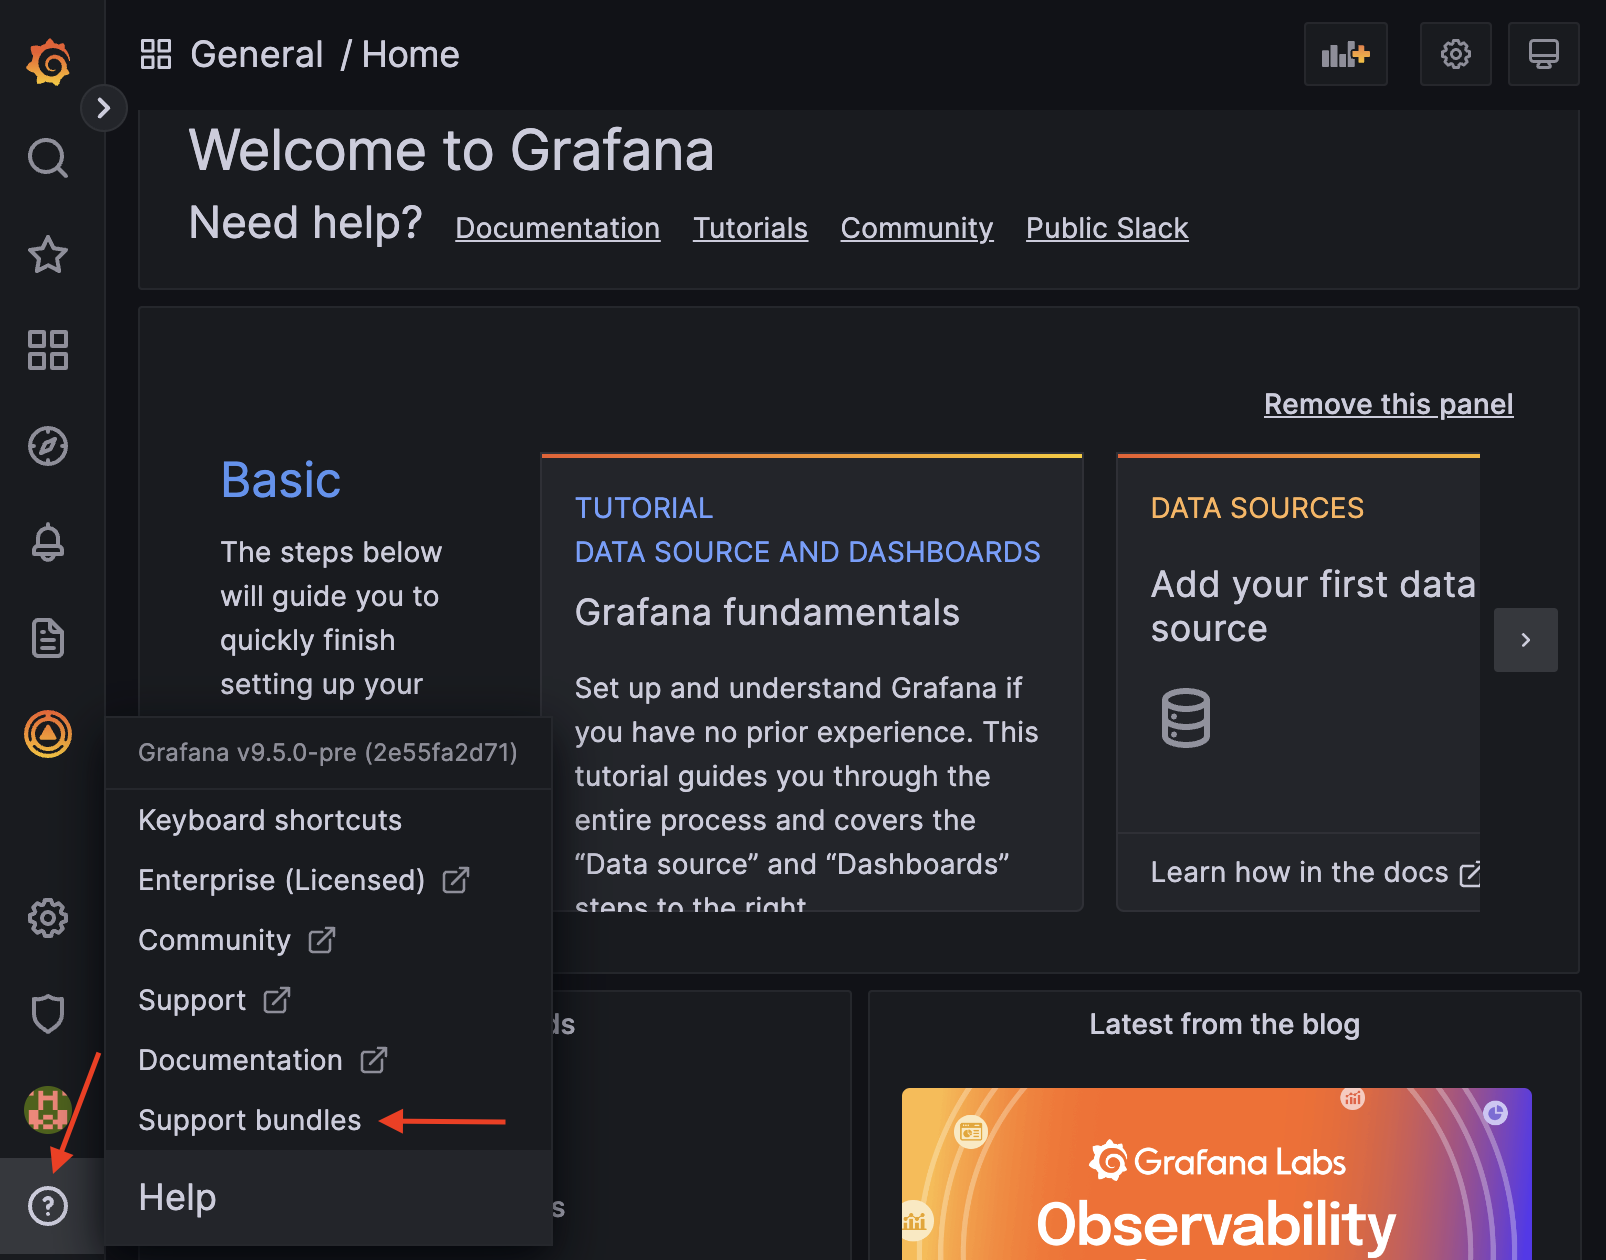 Screenshot of where to find support bundles in Grafana